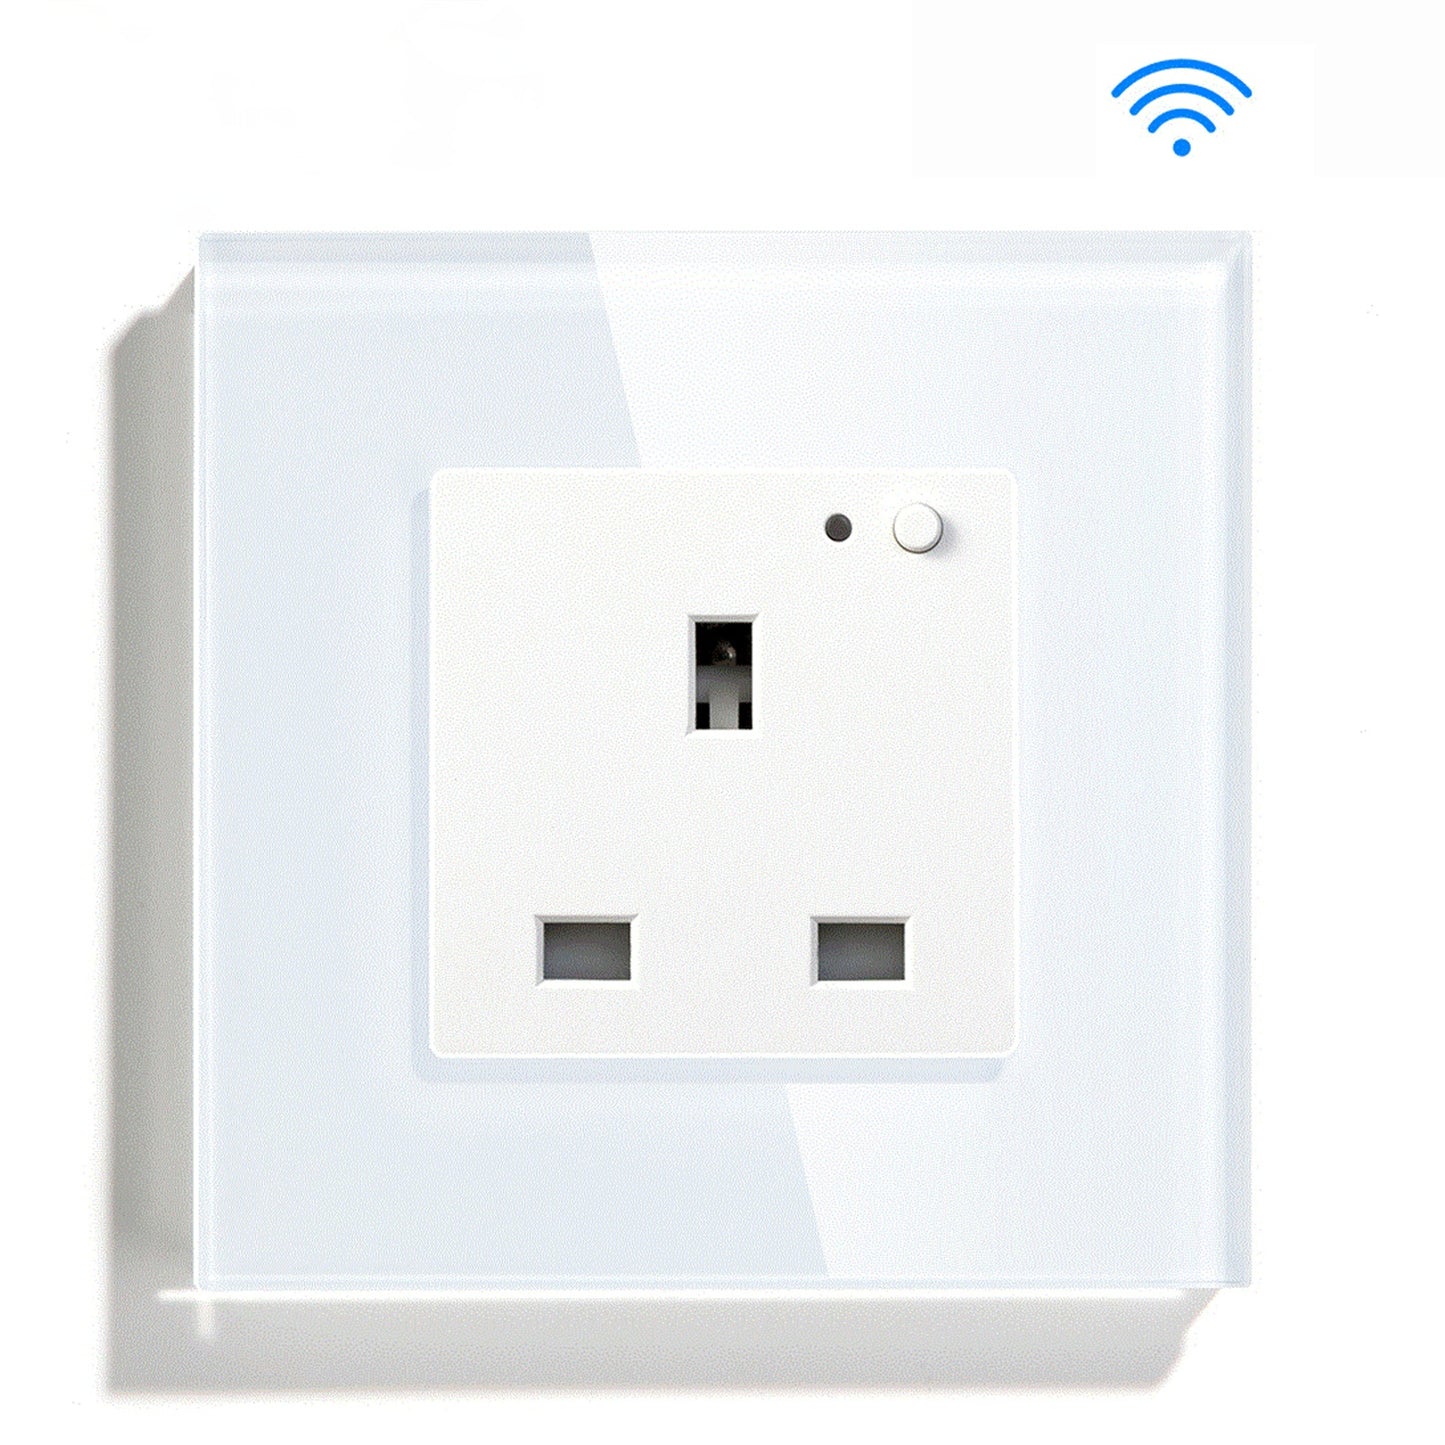 Anjielosmart Tuya WIFI in-Wall Outlets, No Hub Required – Smart Socket Works with Alexa and Google Home, Only 2.4 GHz